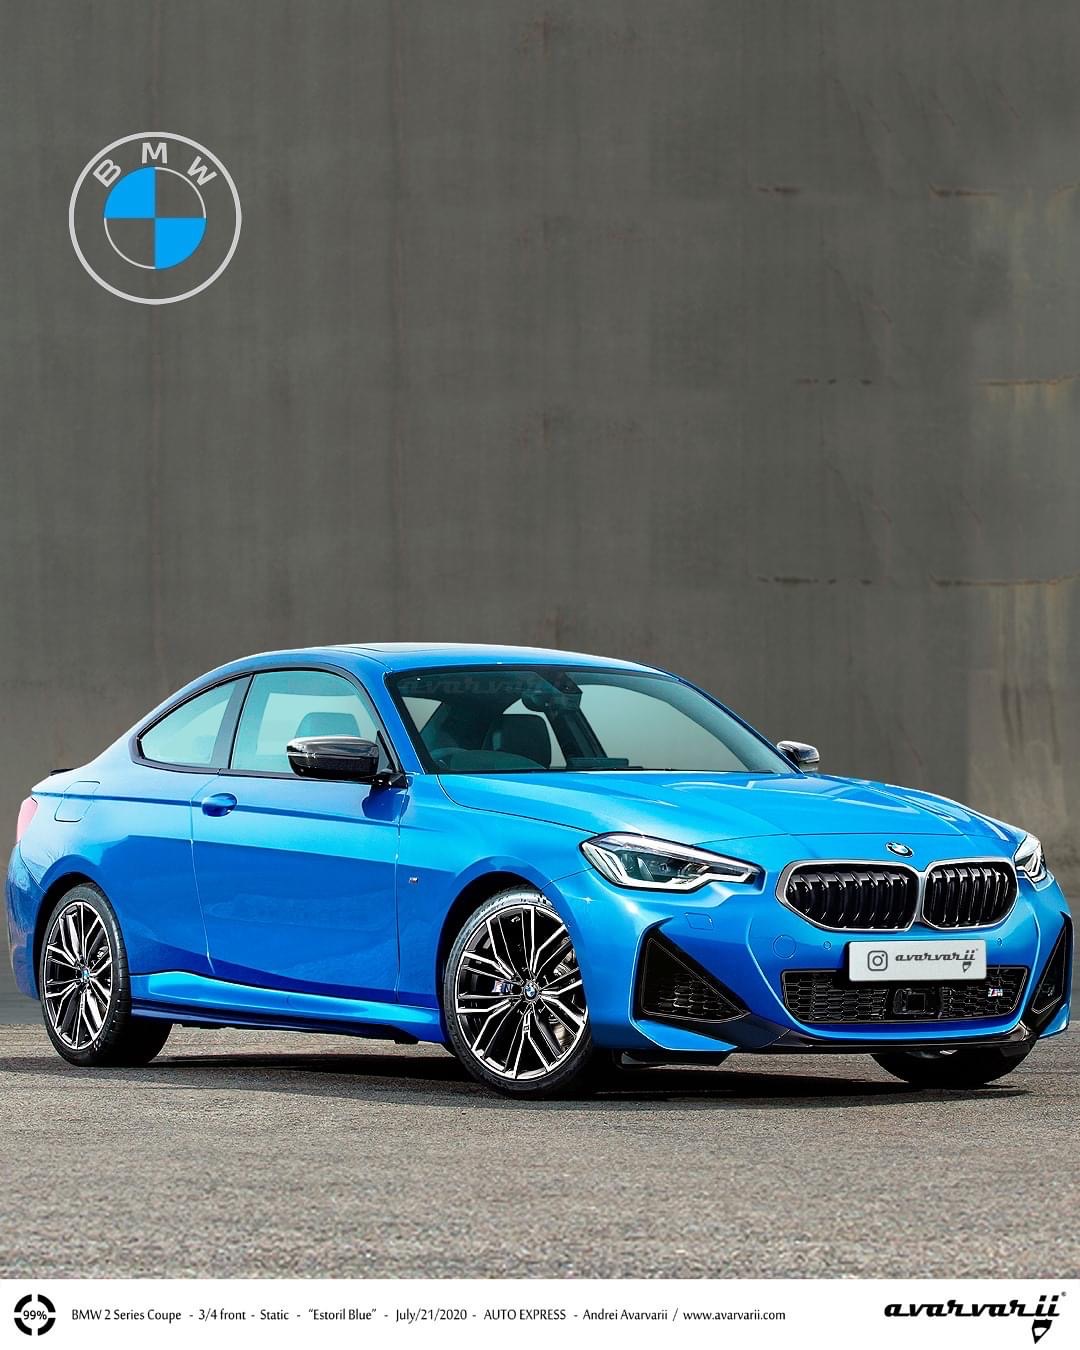 2021 BMW 2 Series Coupe: New leak shows M240i in black